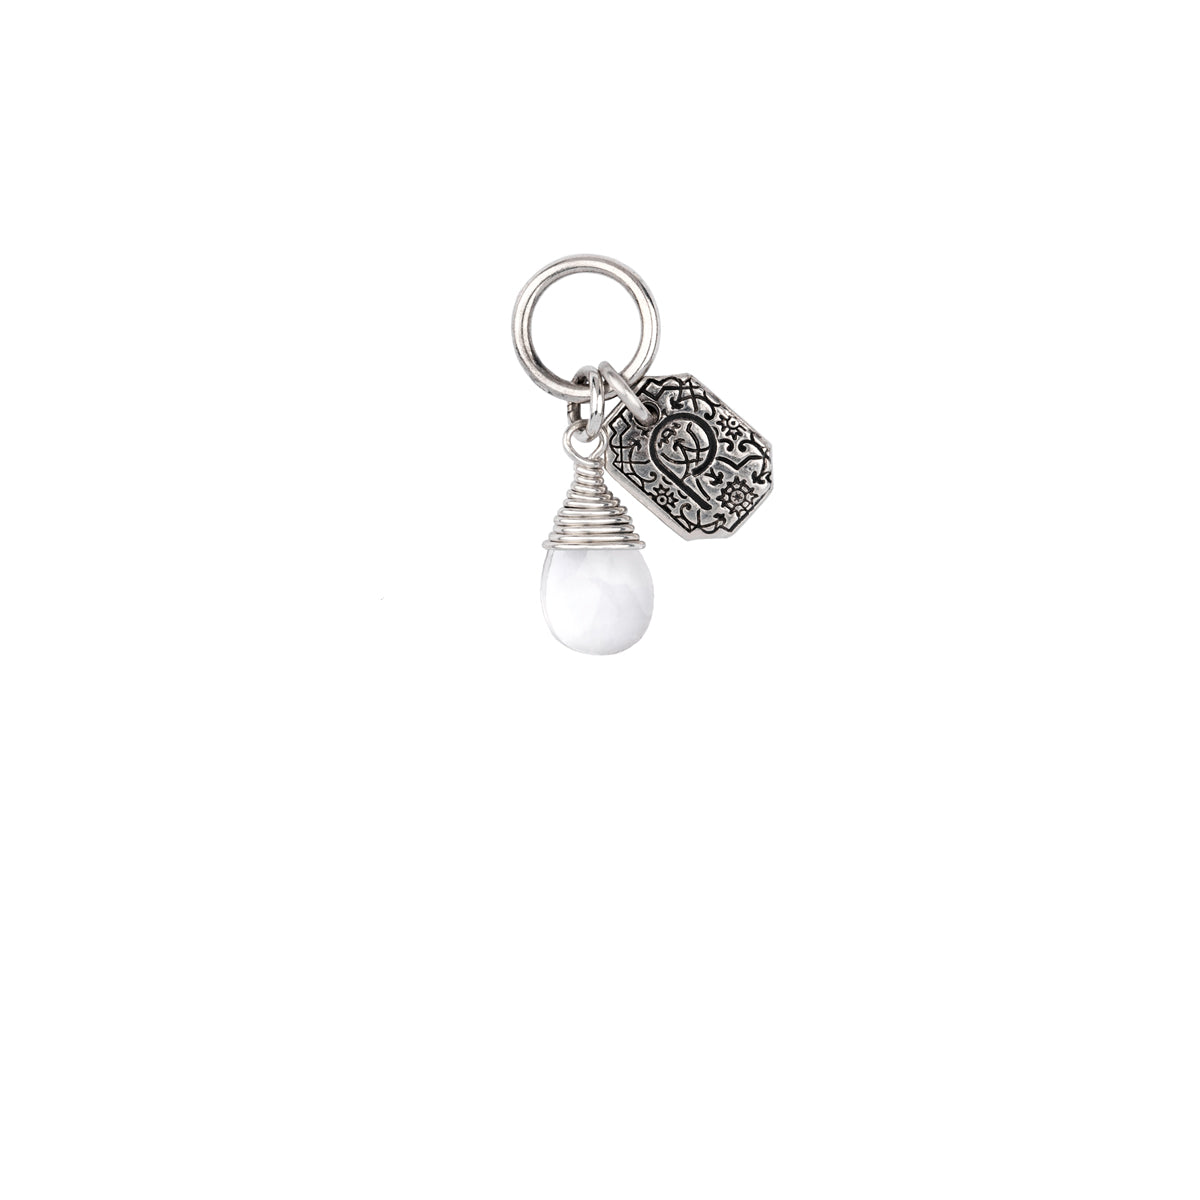 A sterling silver signature attraction charm capped with a clear quartz stone.